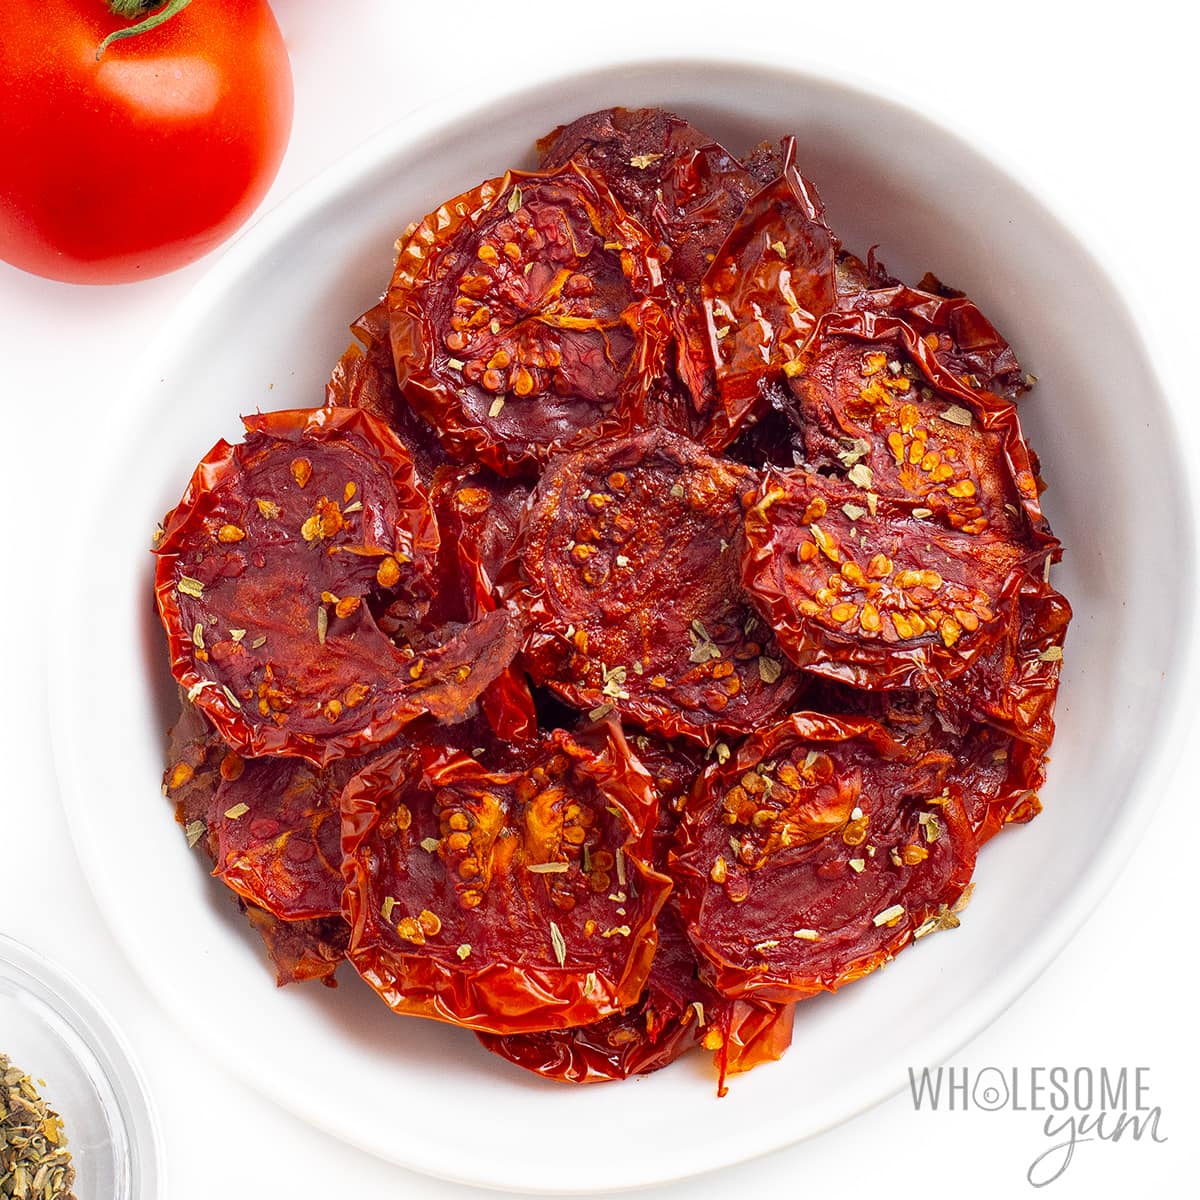 Sun-dried tomatoes in the oven come out looking like this.